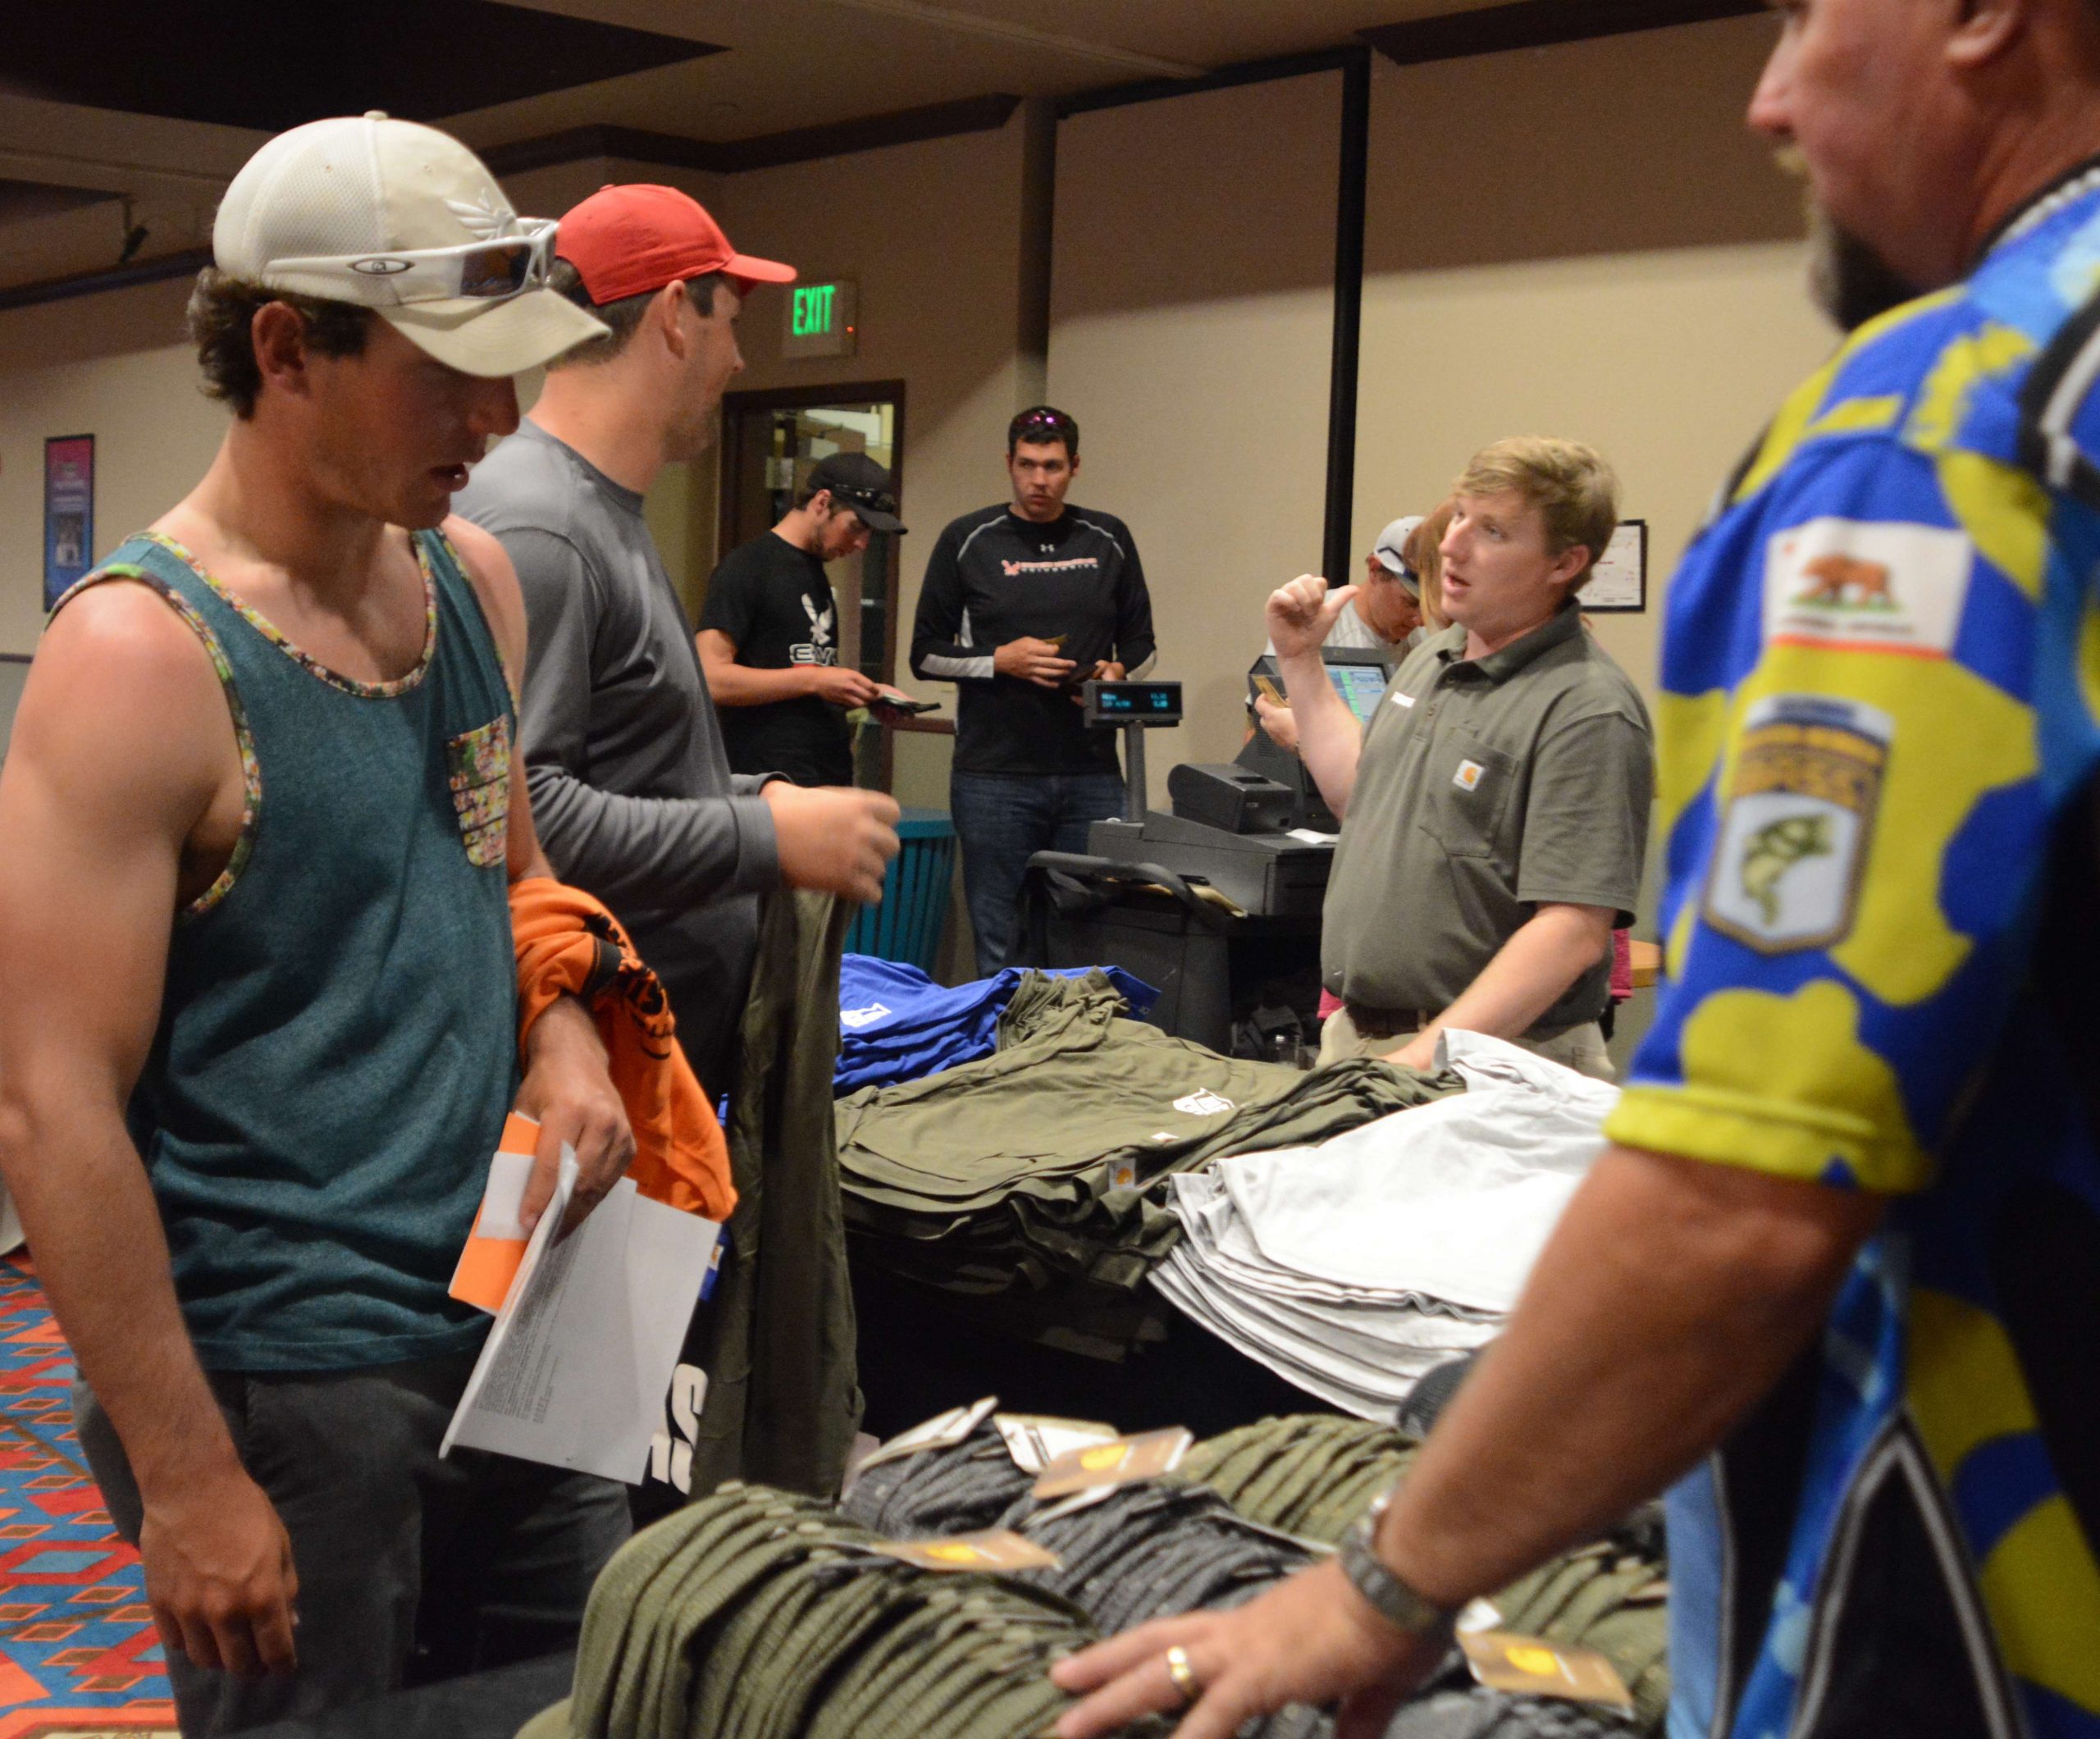 Anglers gather around and collect their swag.